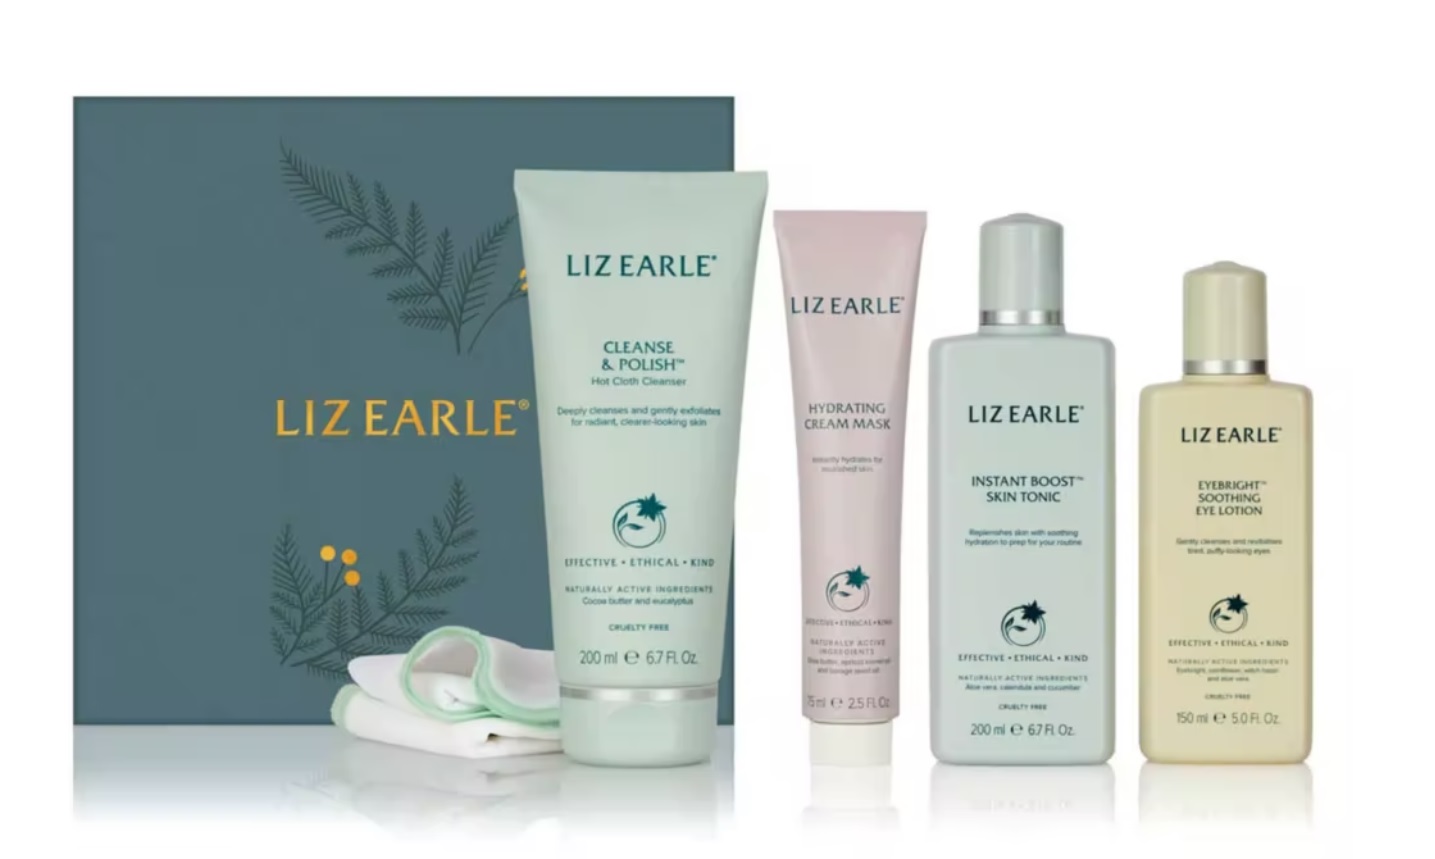 Save £57 on this full-size four-piece Liz Earle set